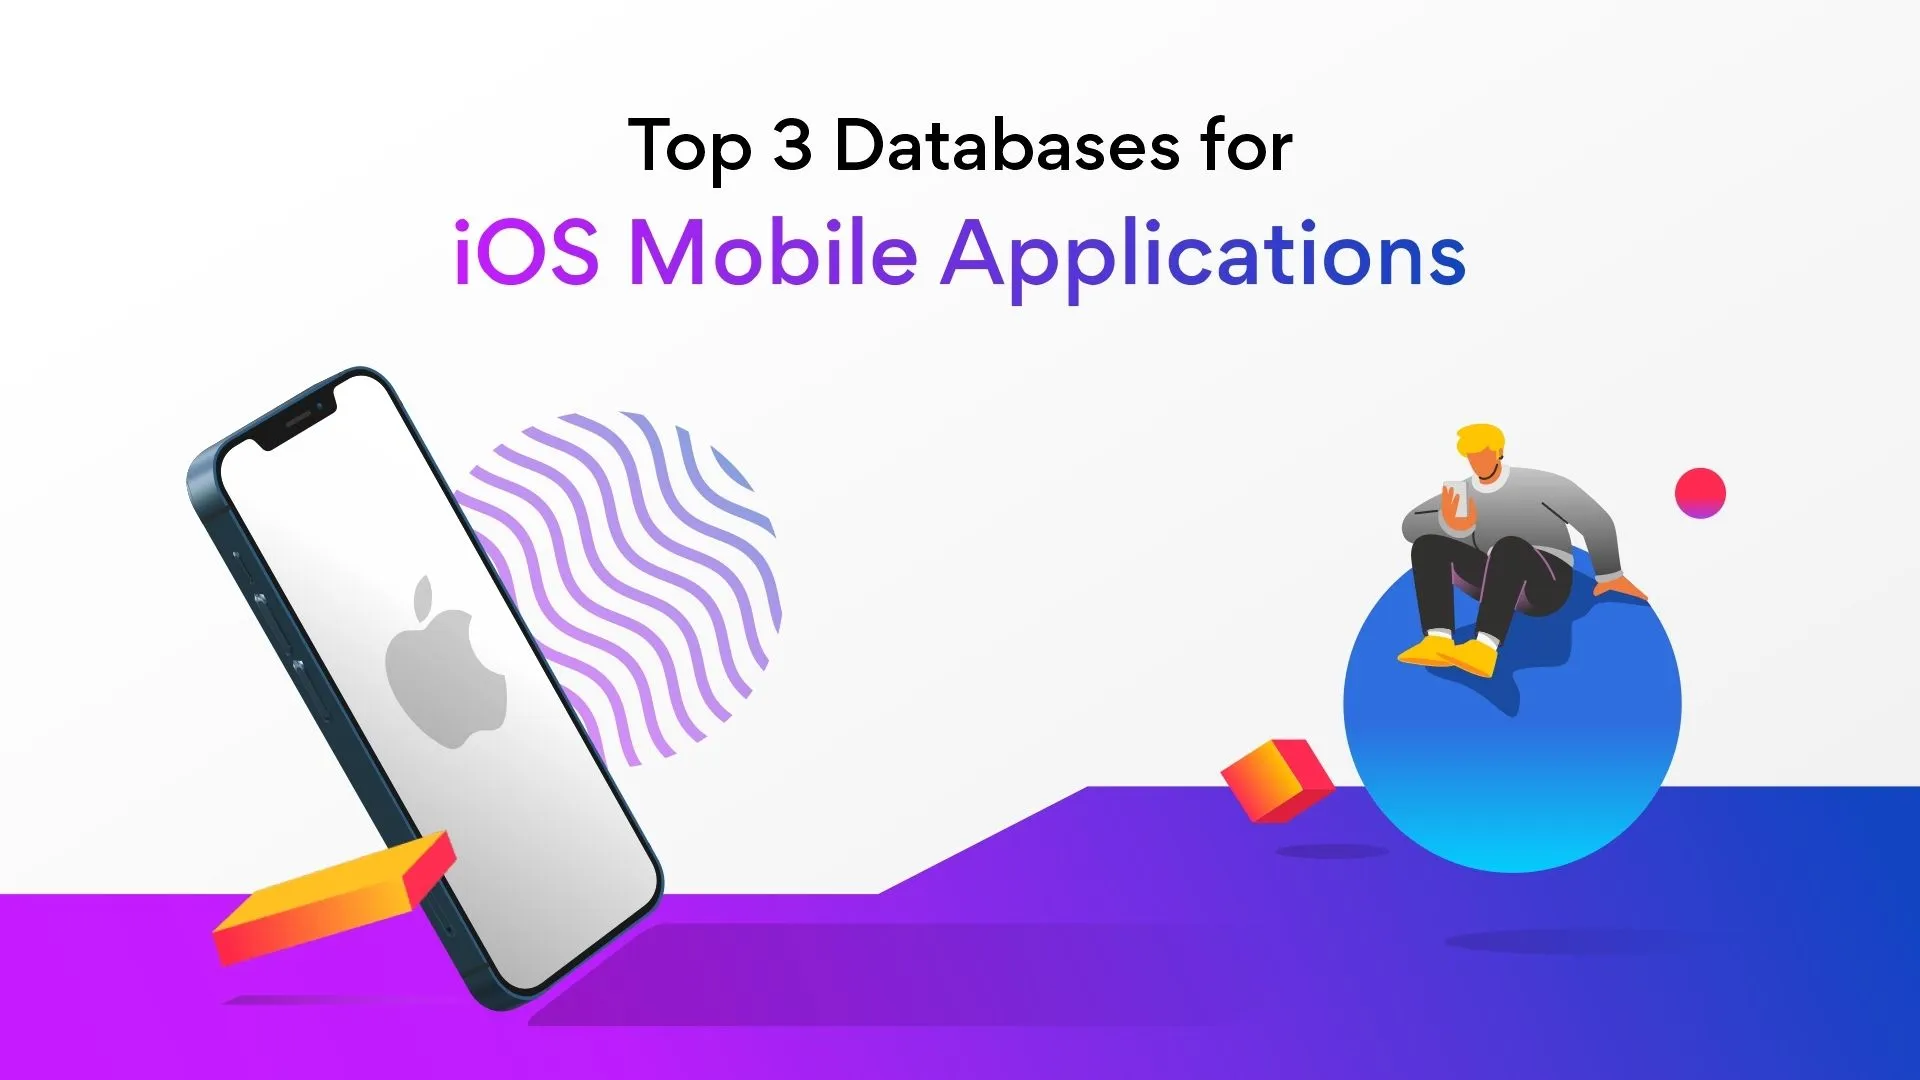 Top 3 Databases for iOS Mobile Applications